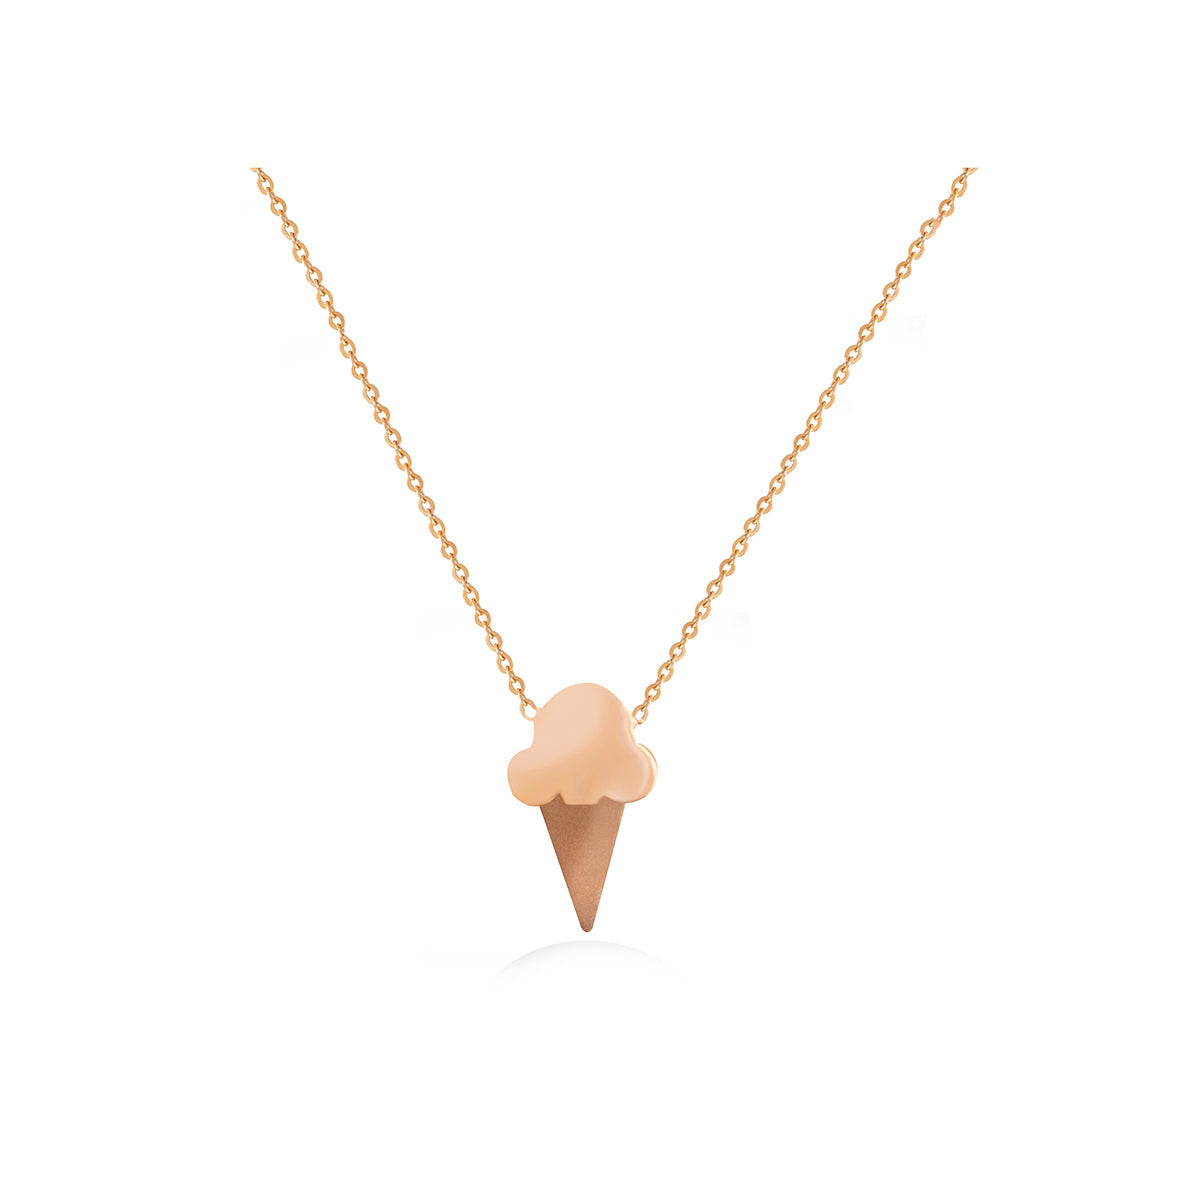 Cherish the Moments: Rose Gold Ice Cream Charm Necklace